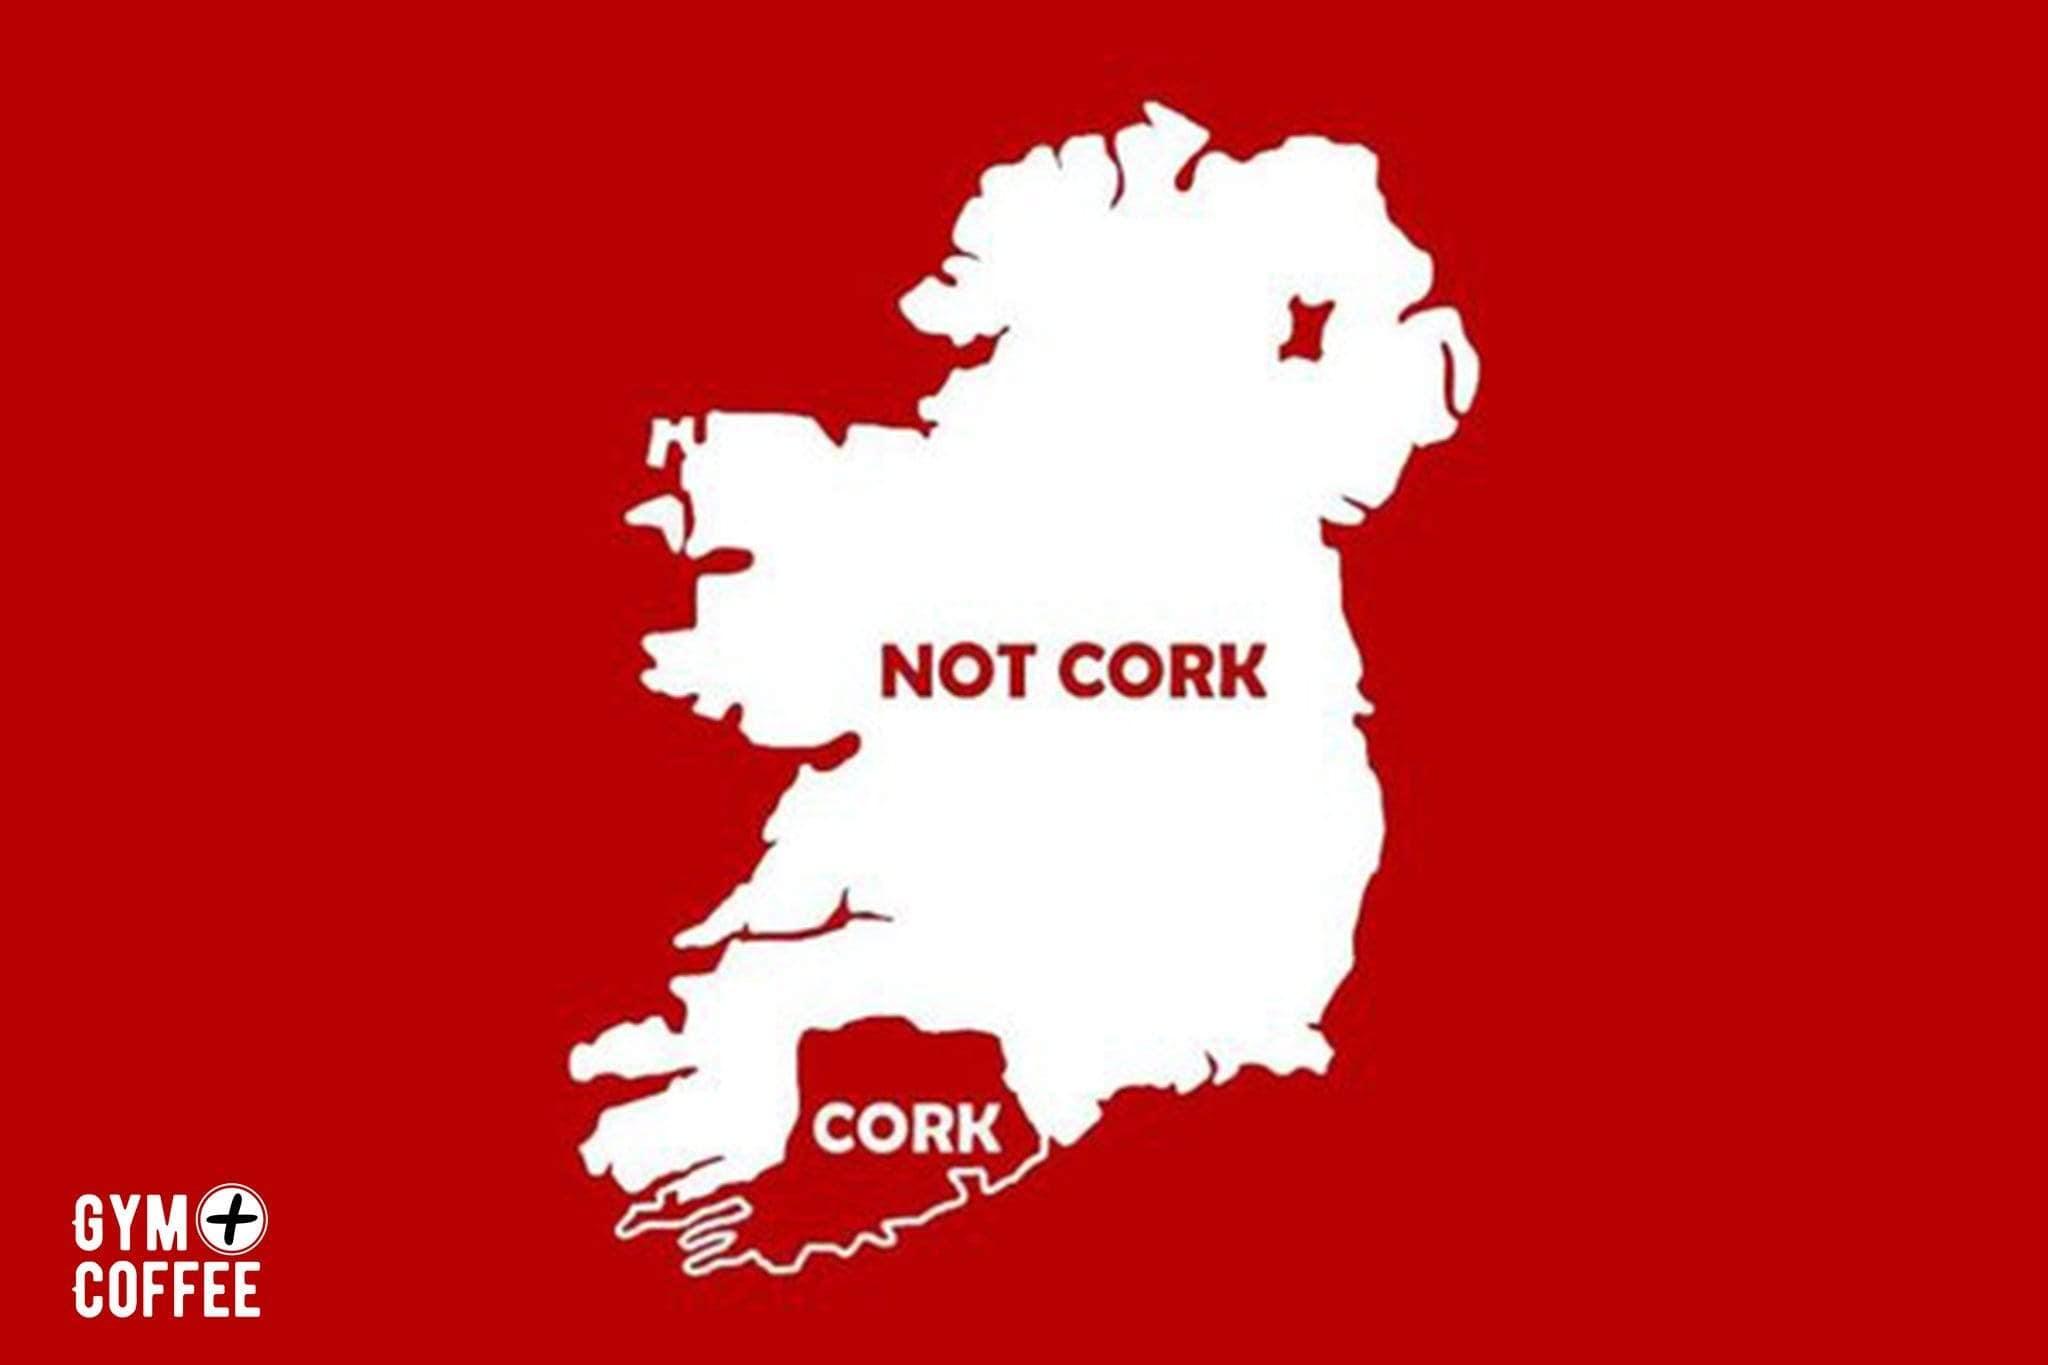 A List of Things That Are Made From Cork - Gym+Coffee